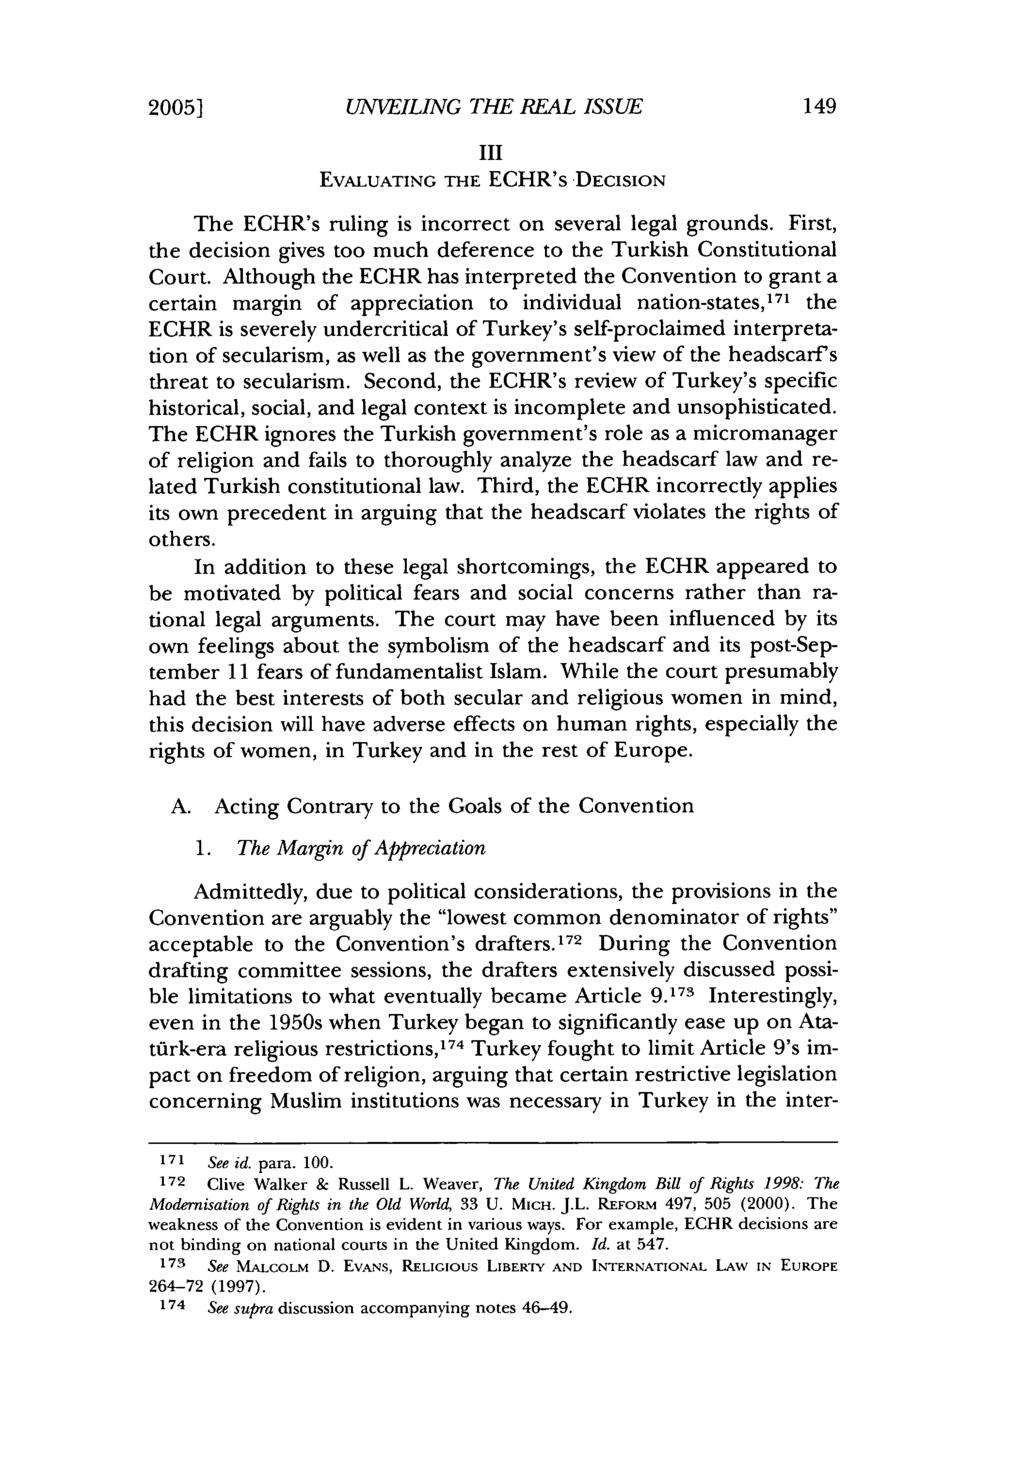 2005] UNVEILING THE REAL ISSUE III EVALUATING THE ECHR's DECISION The ECHR's ruling is incorrect on several legal grounds.